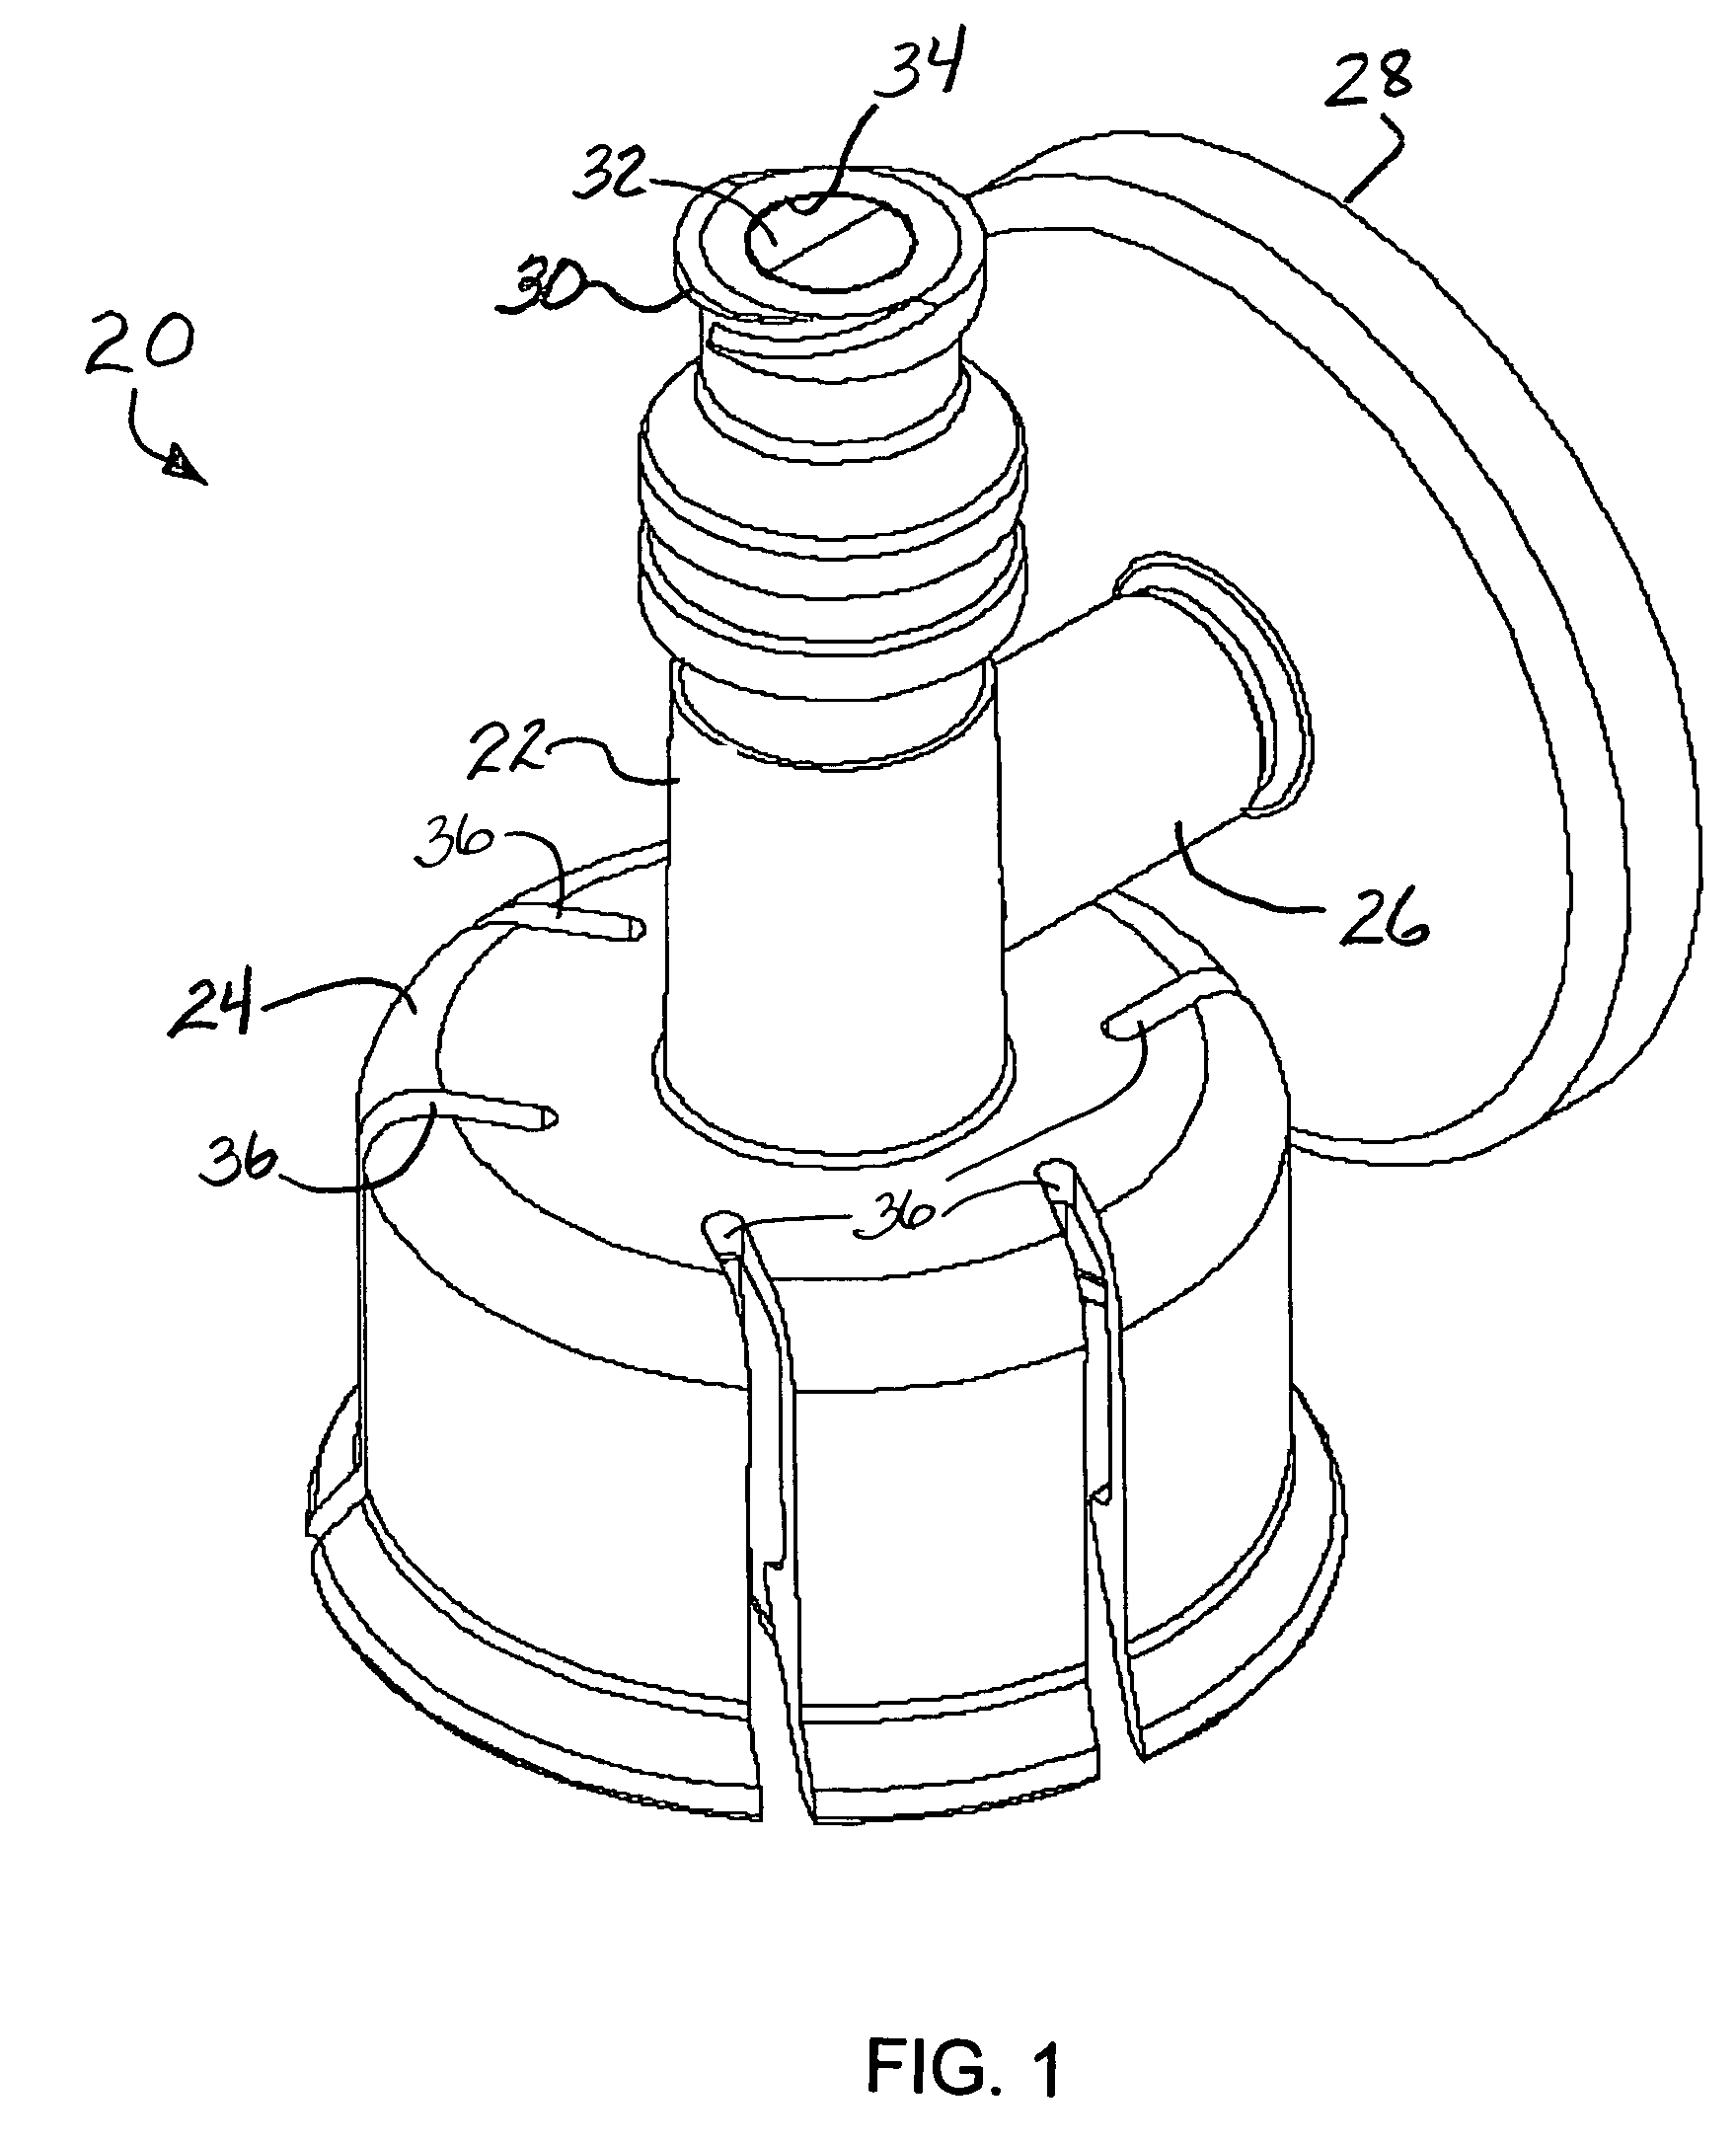 Medical vial adapter with reduced diameter cannula and enlarged vent lumen